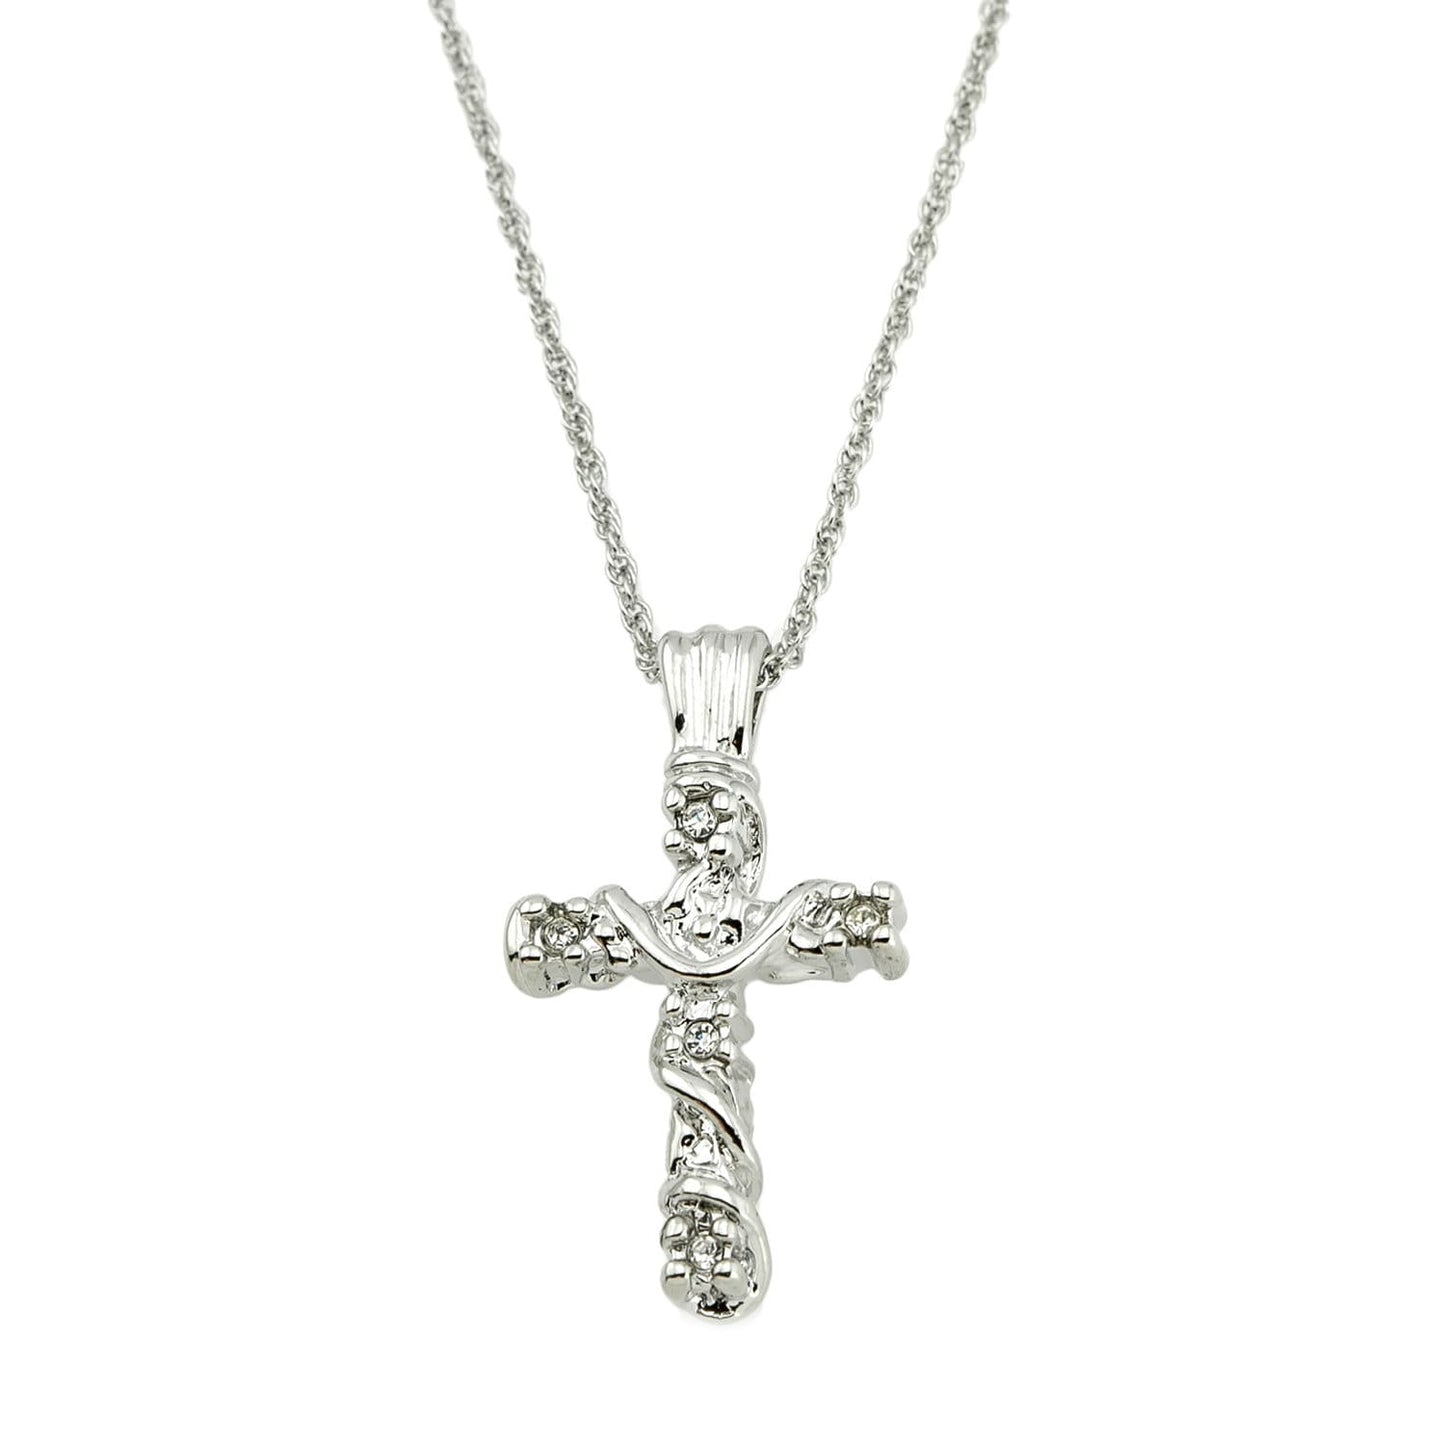 Vintage Cross Pendant with Swarovski Crystals 16 Inch White Gold Silver Plated Pendant Necklace #N624-W - Limited Stock - Never Worn